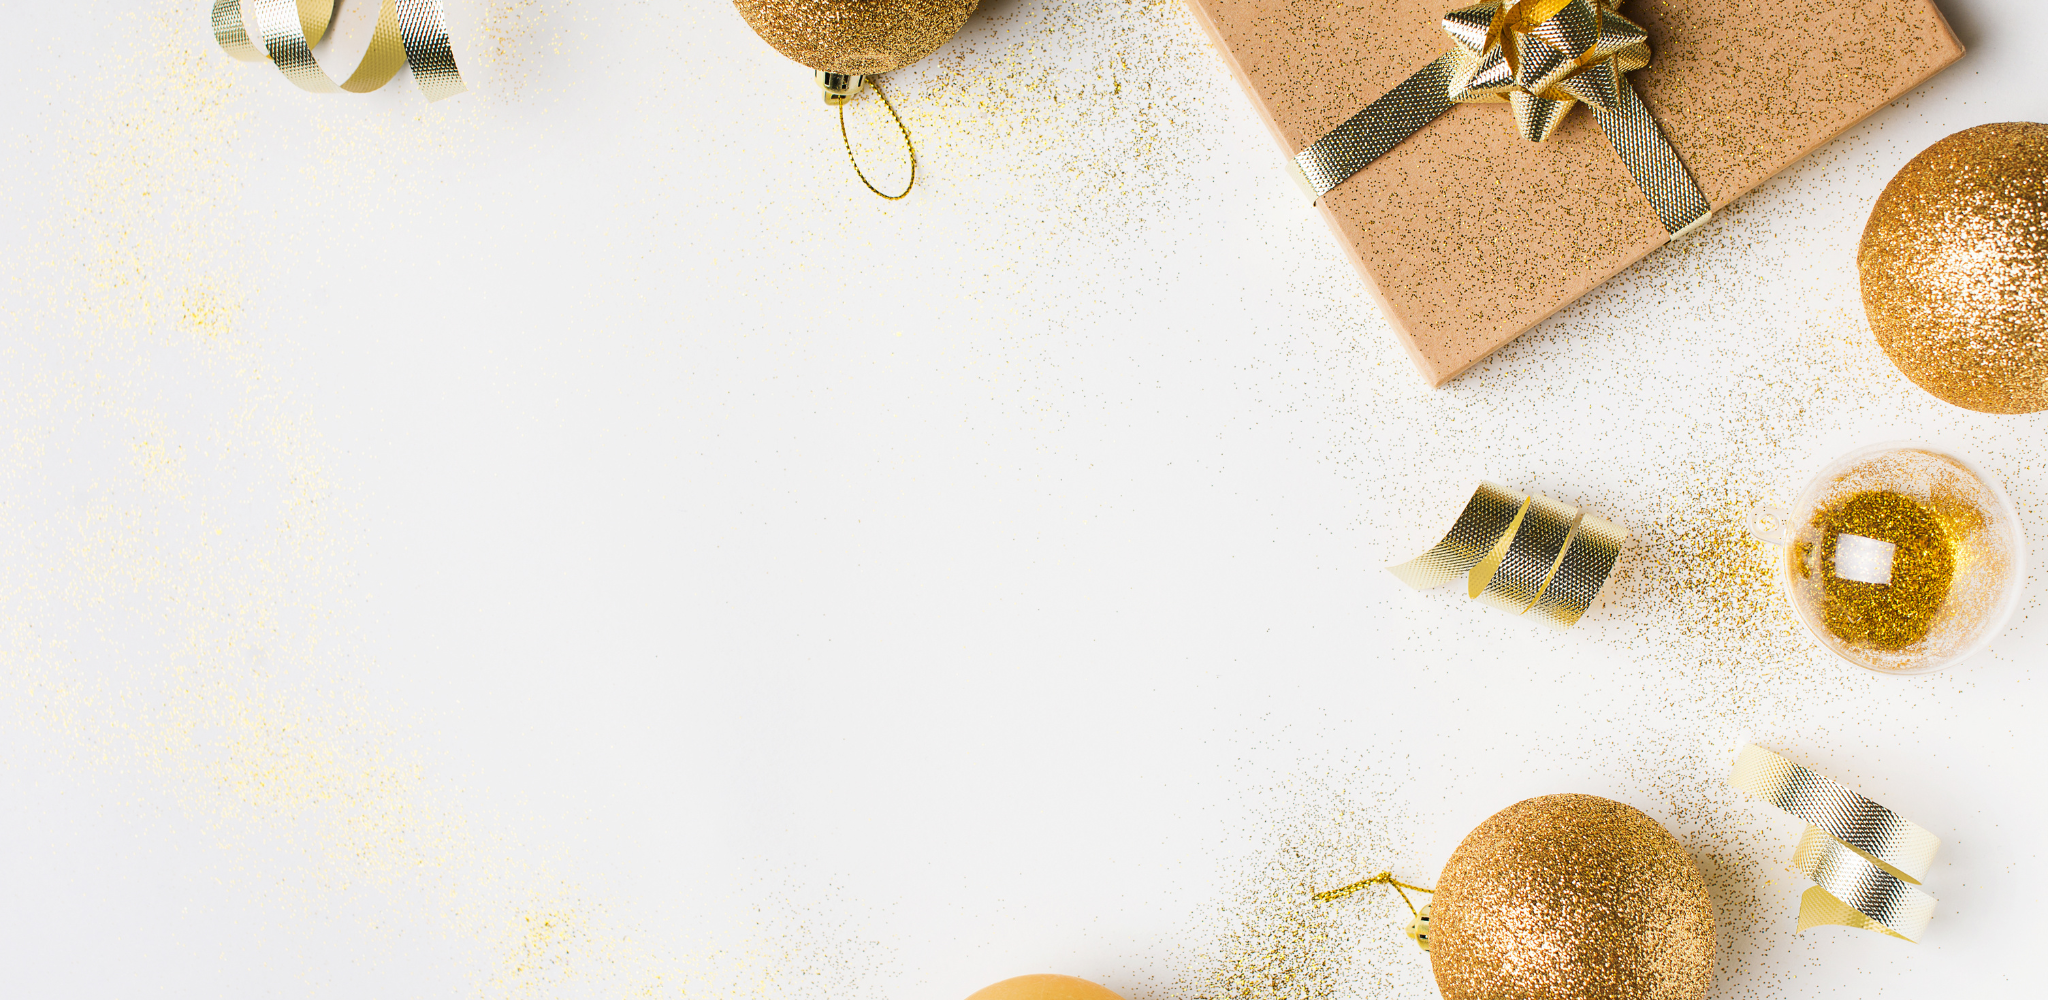 white and gold background with gold gifts, confetti and holiday ornaments